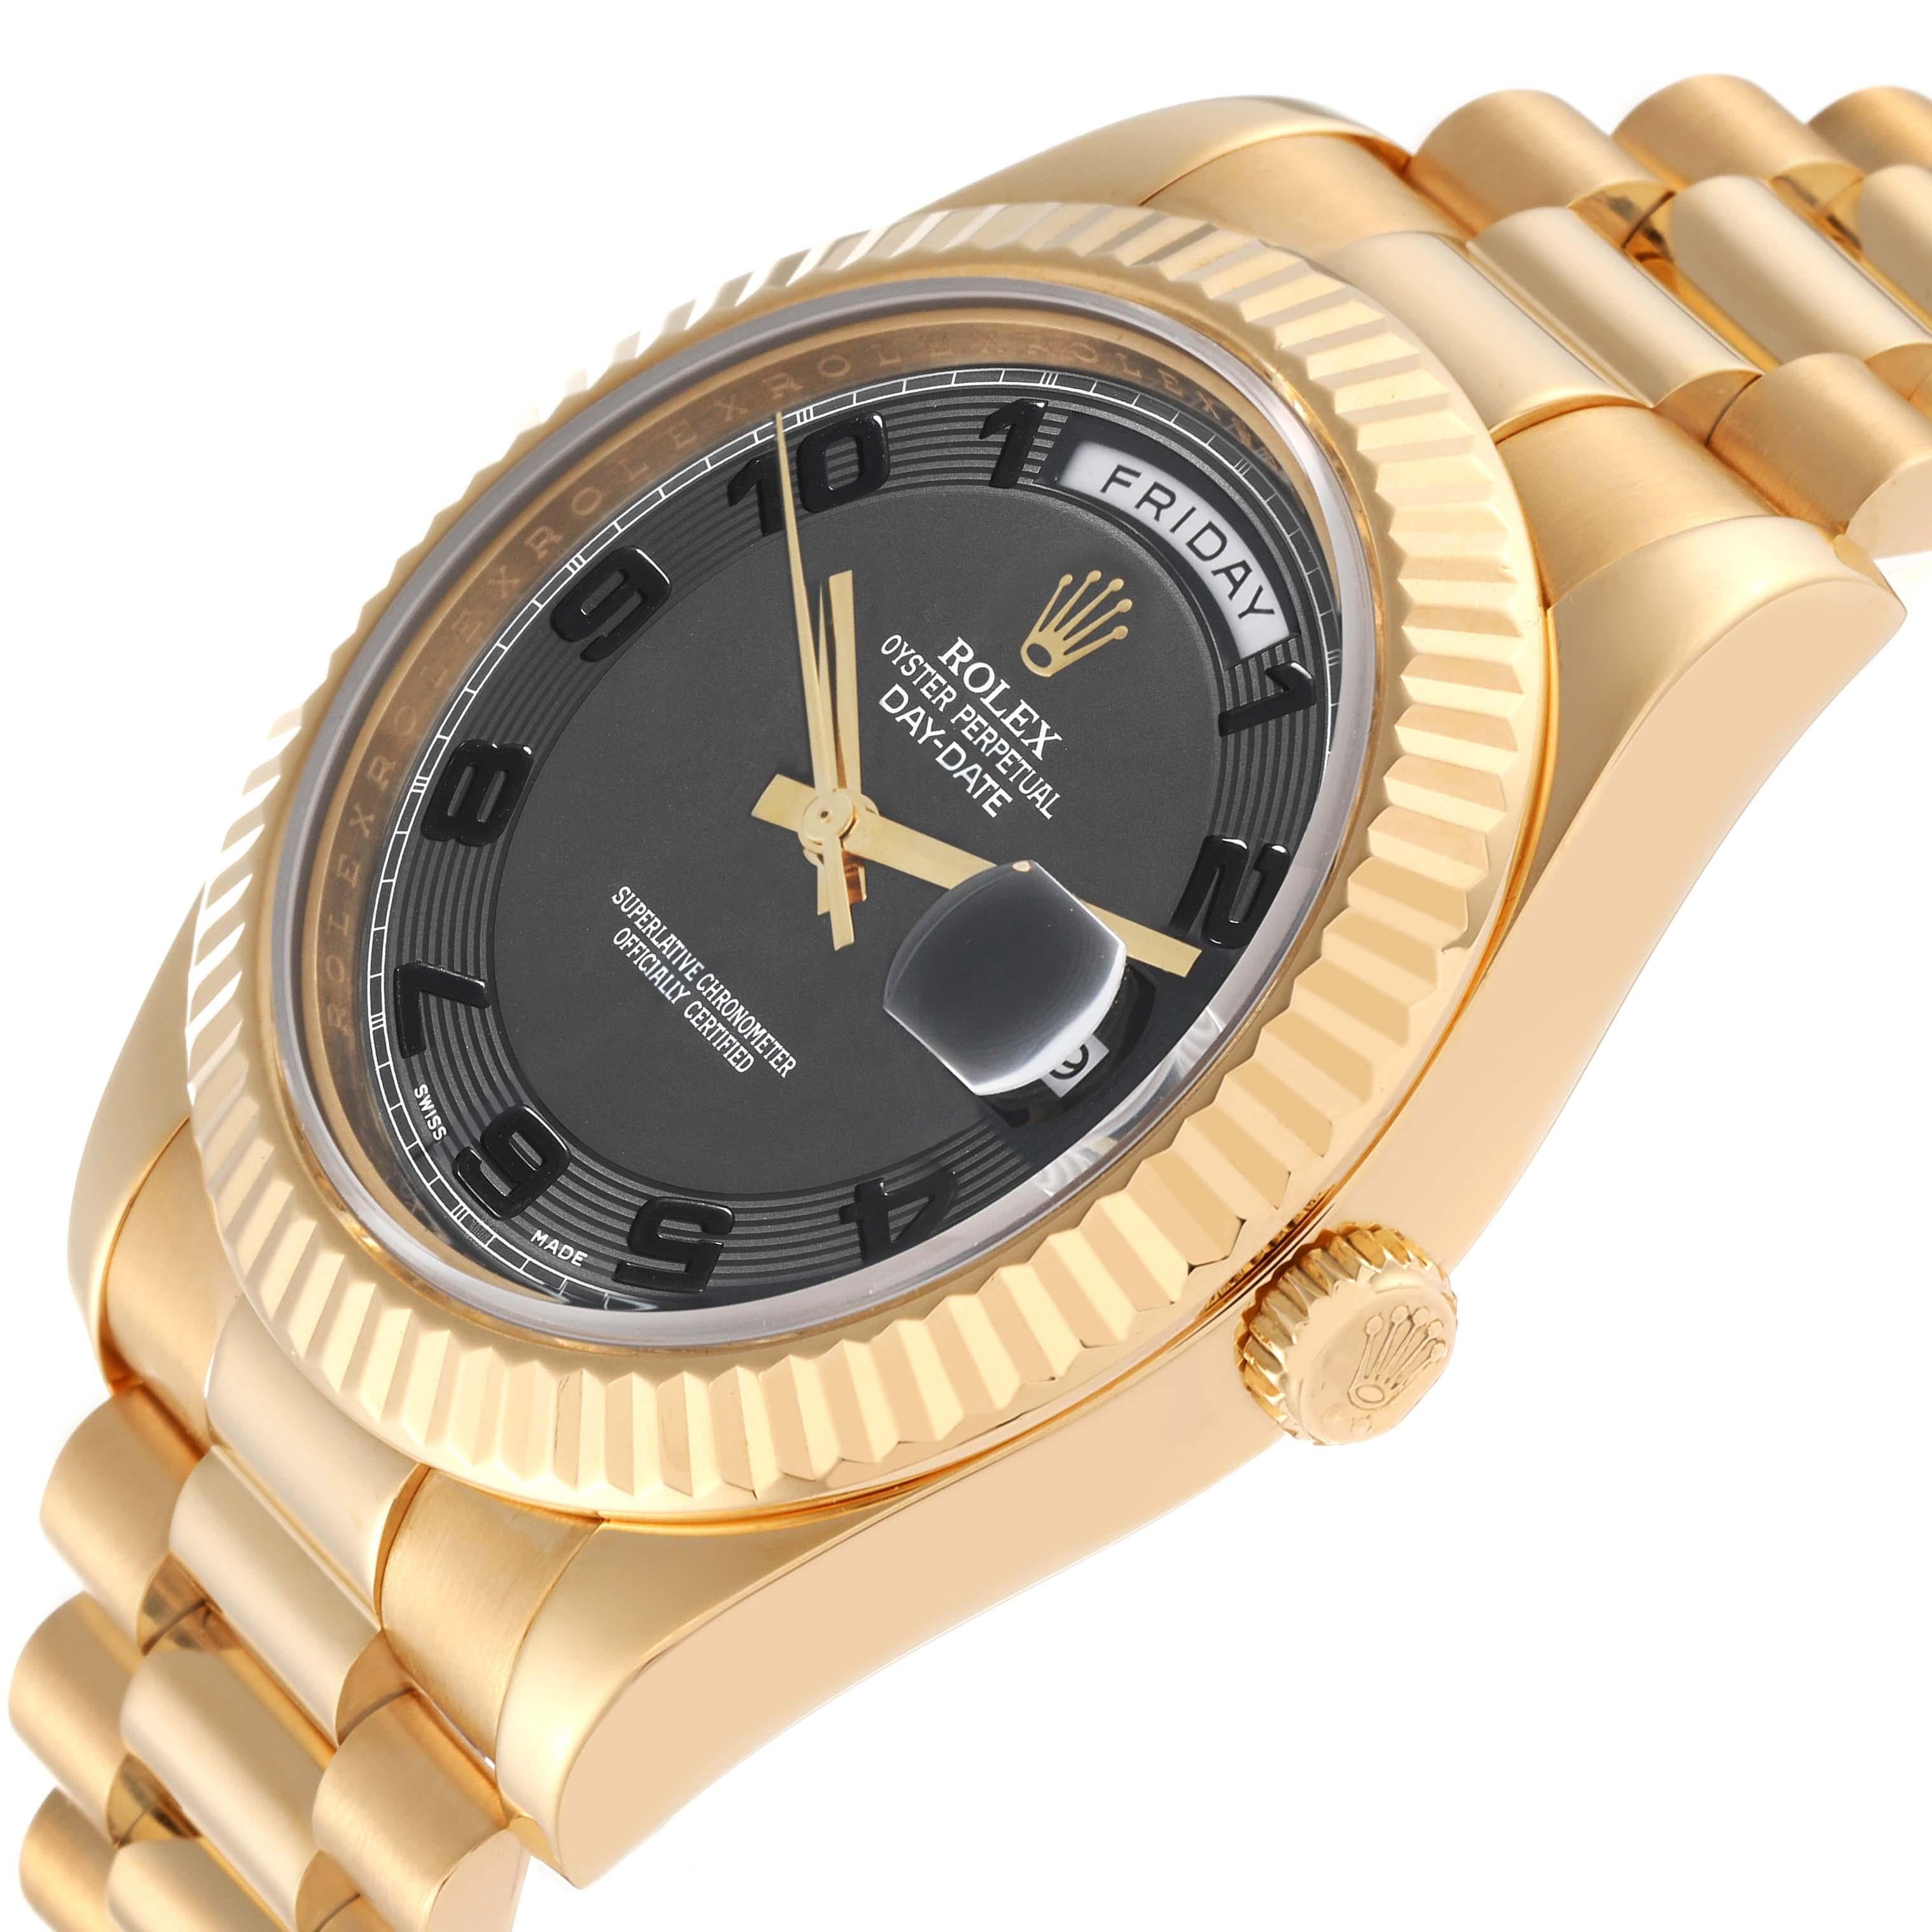 Rolex Day-Date II 41 President Yellow Gold Black Dial Mens Watch 218238 For Sale 2